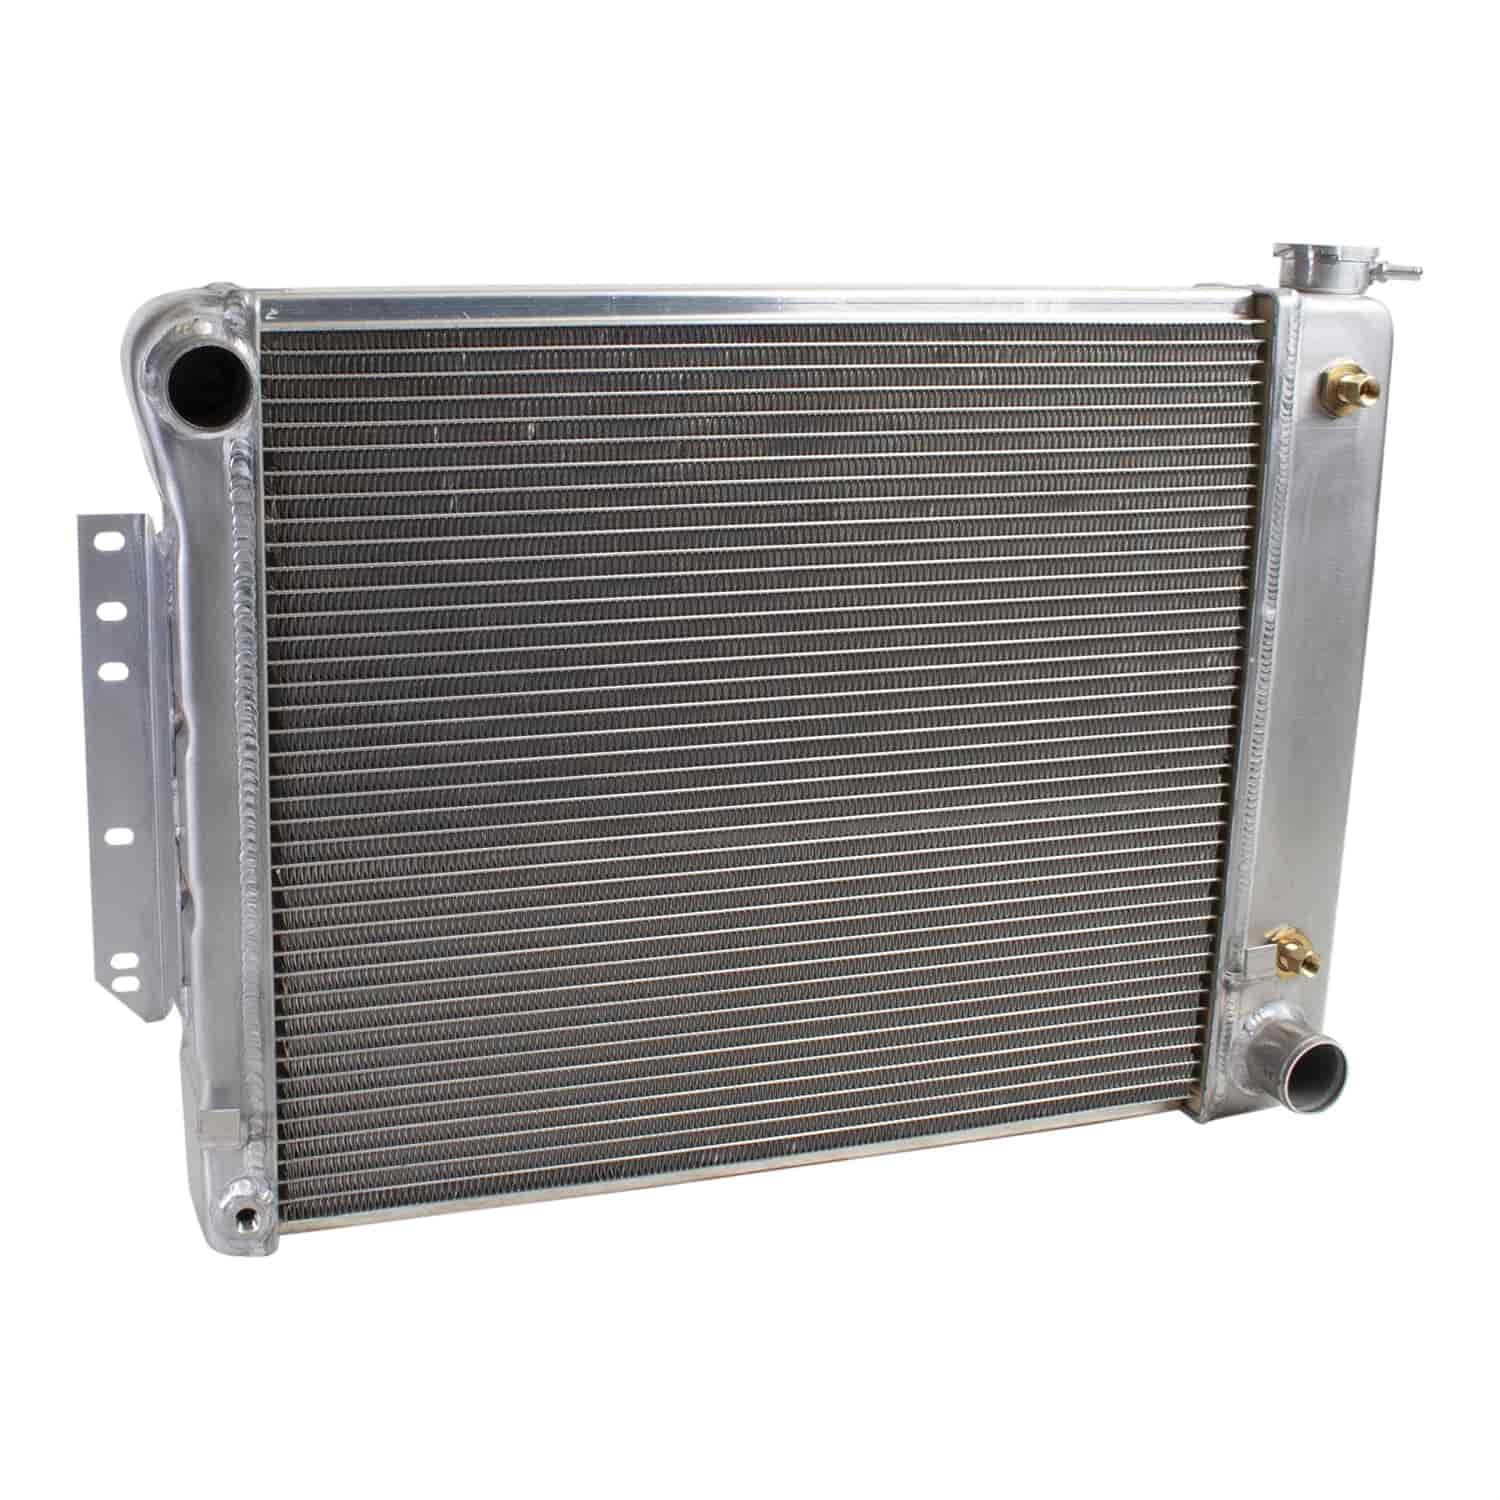 ExactFit Radiator for 1967-1969 Camaro/Firebird F Body with Transmission Cooler